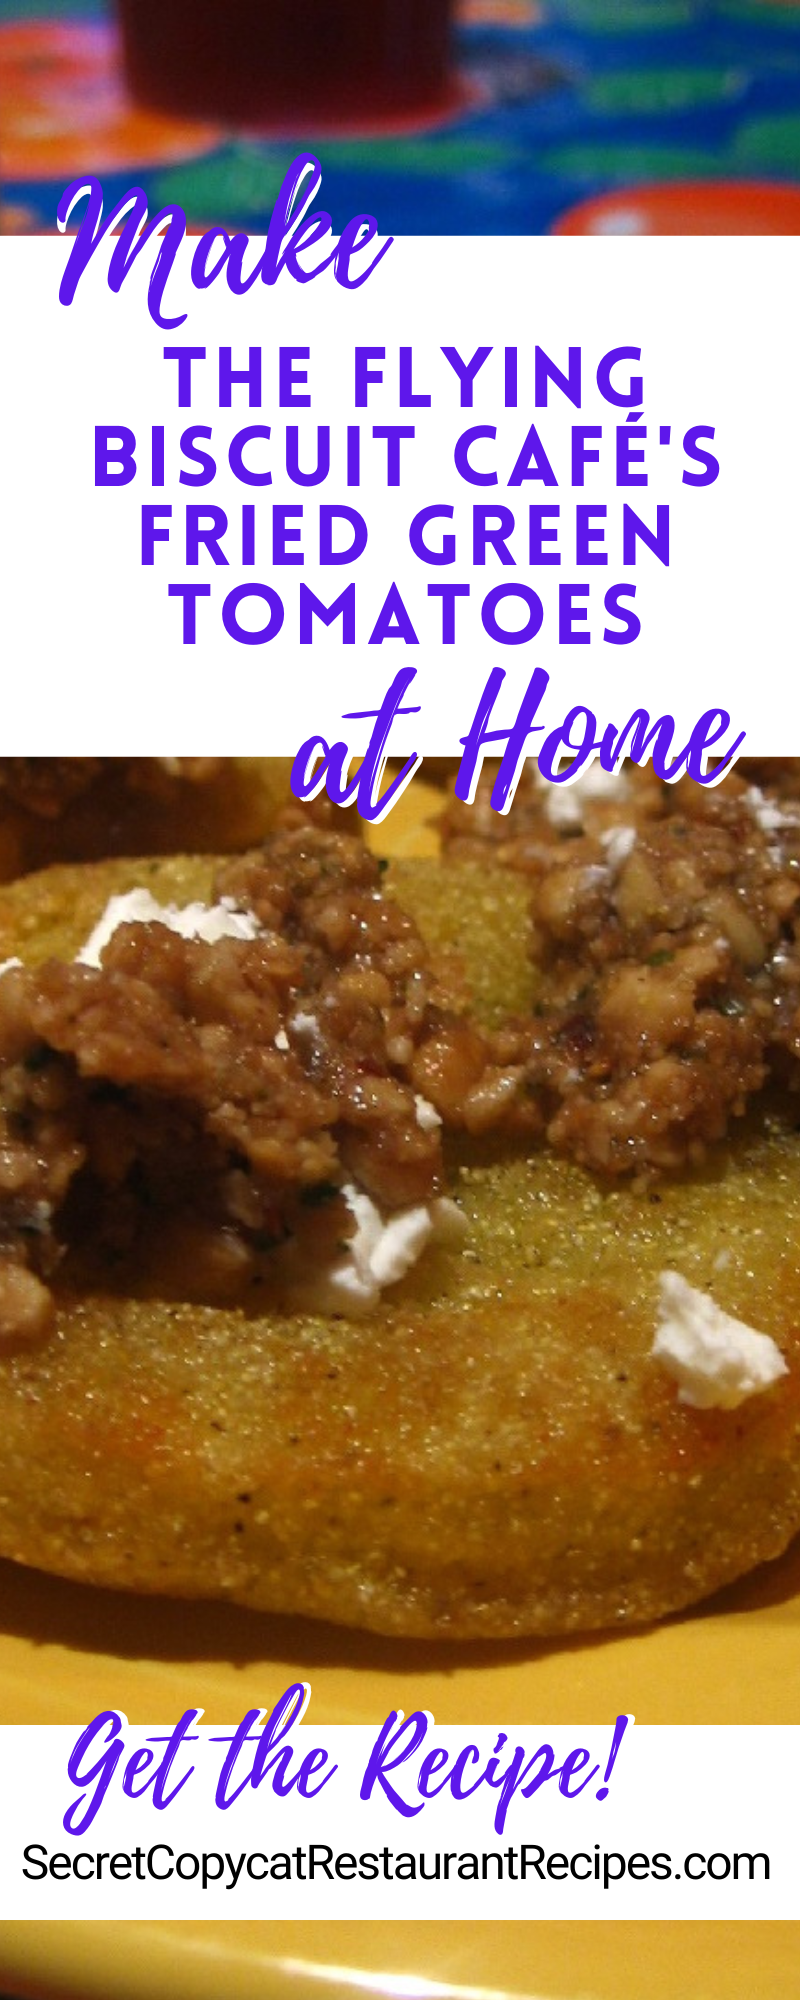 The Flying Biscuit Café Fried Green Tomatoes Recipe